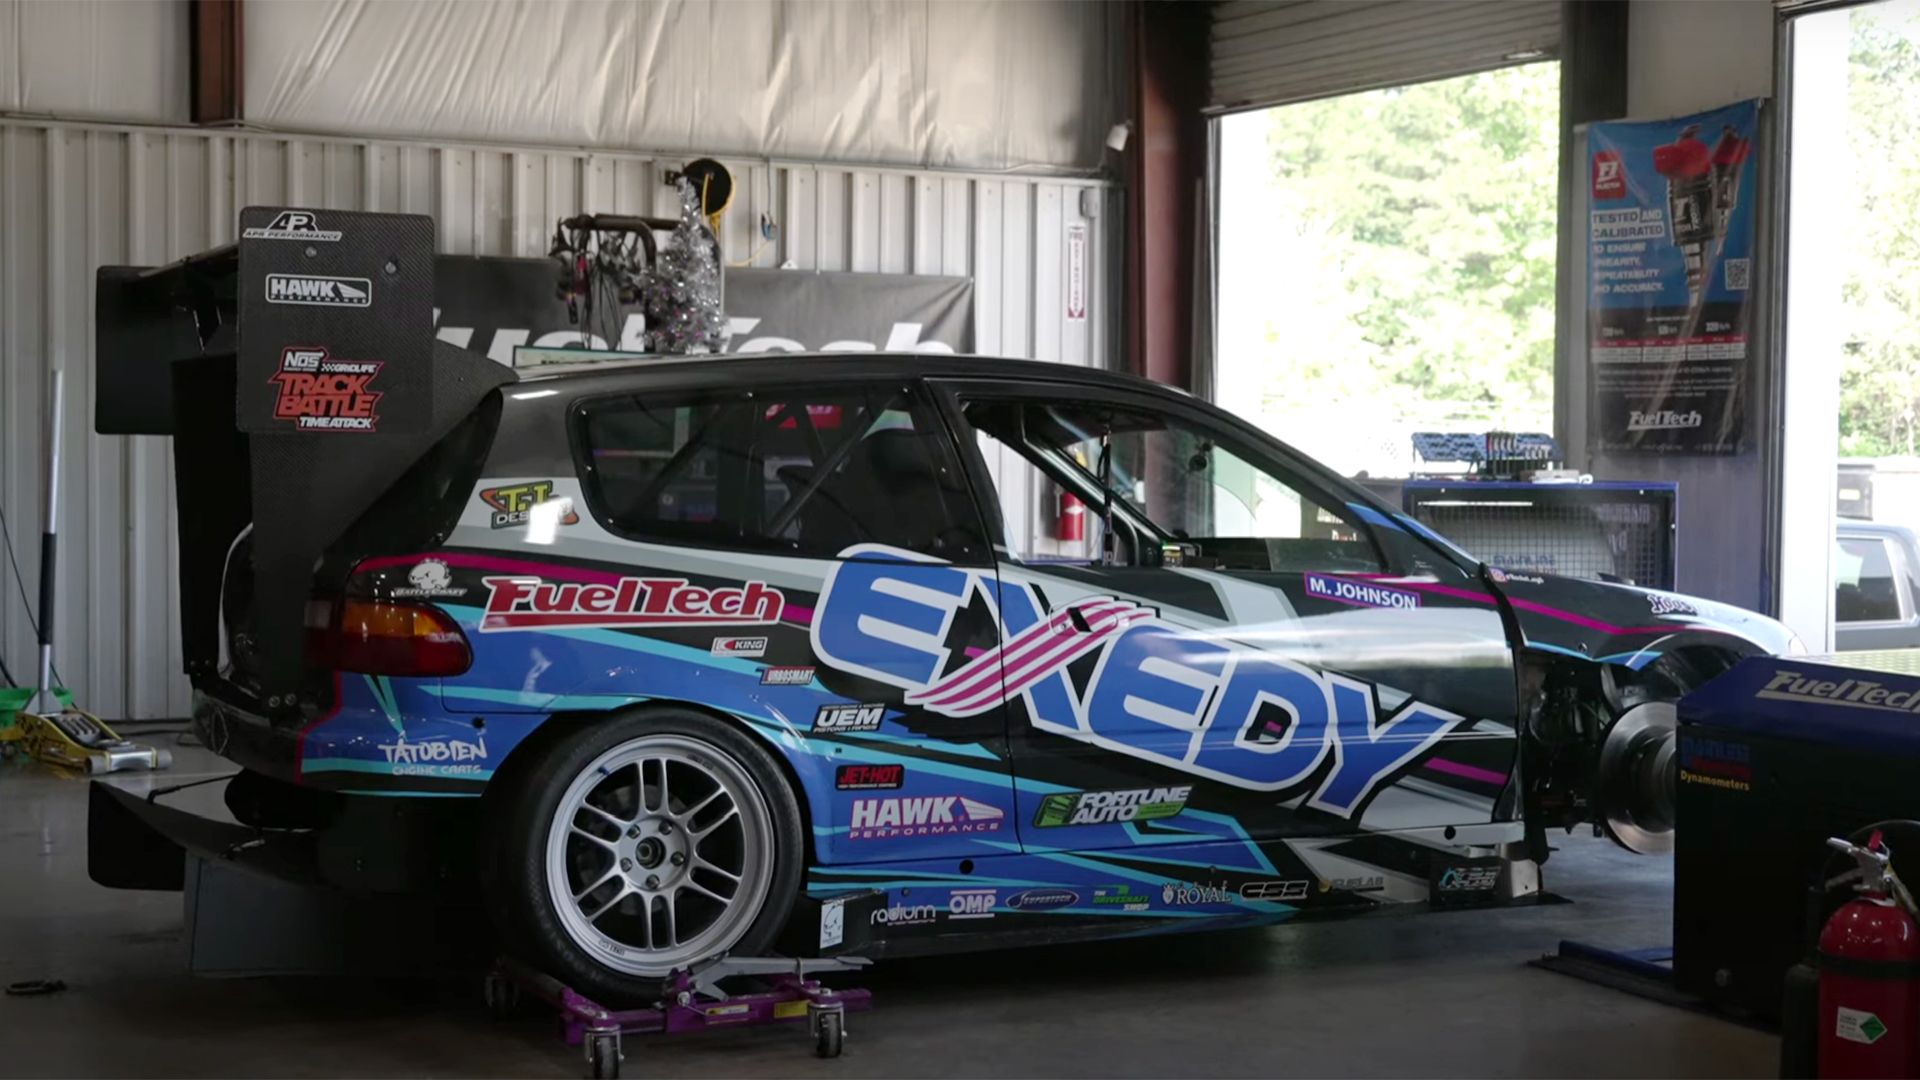 This Incredible Honda Civic Hatchback From FuelTech Sends Over 700 HP To The Front Wheels